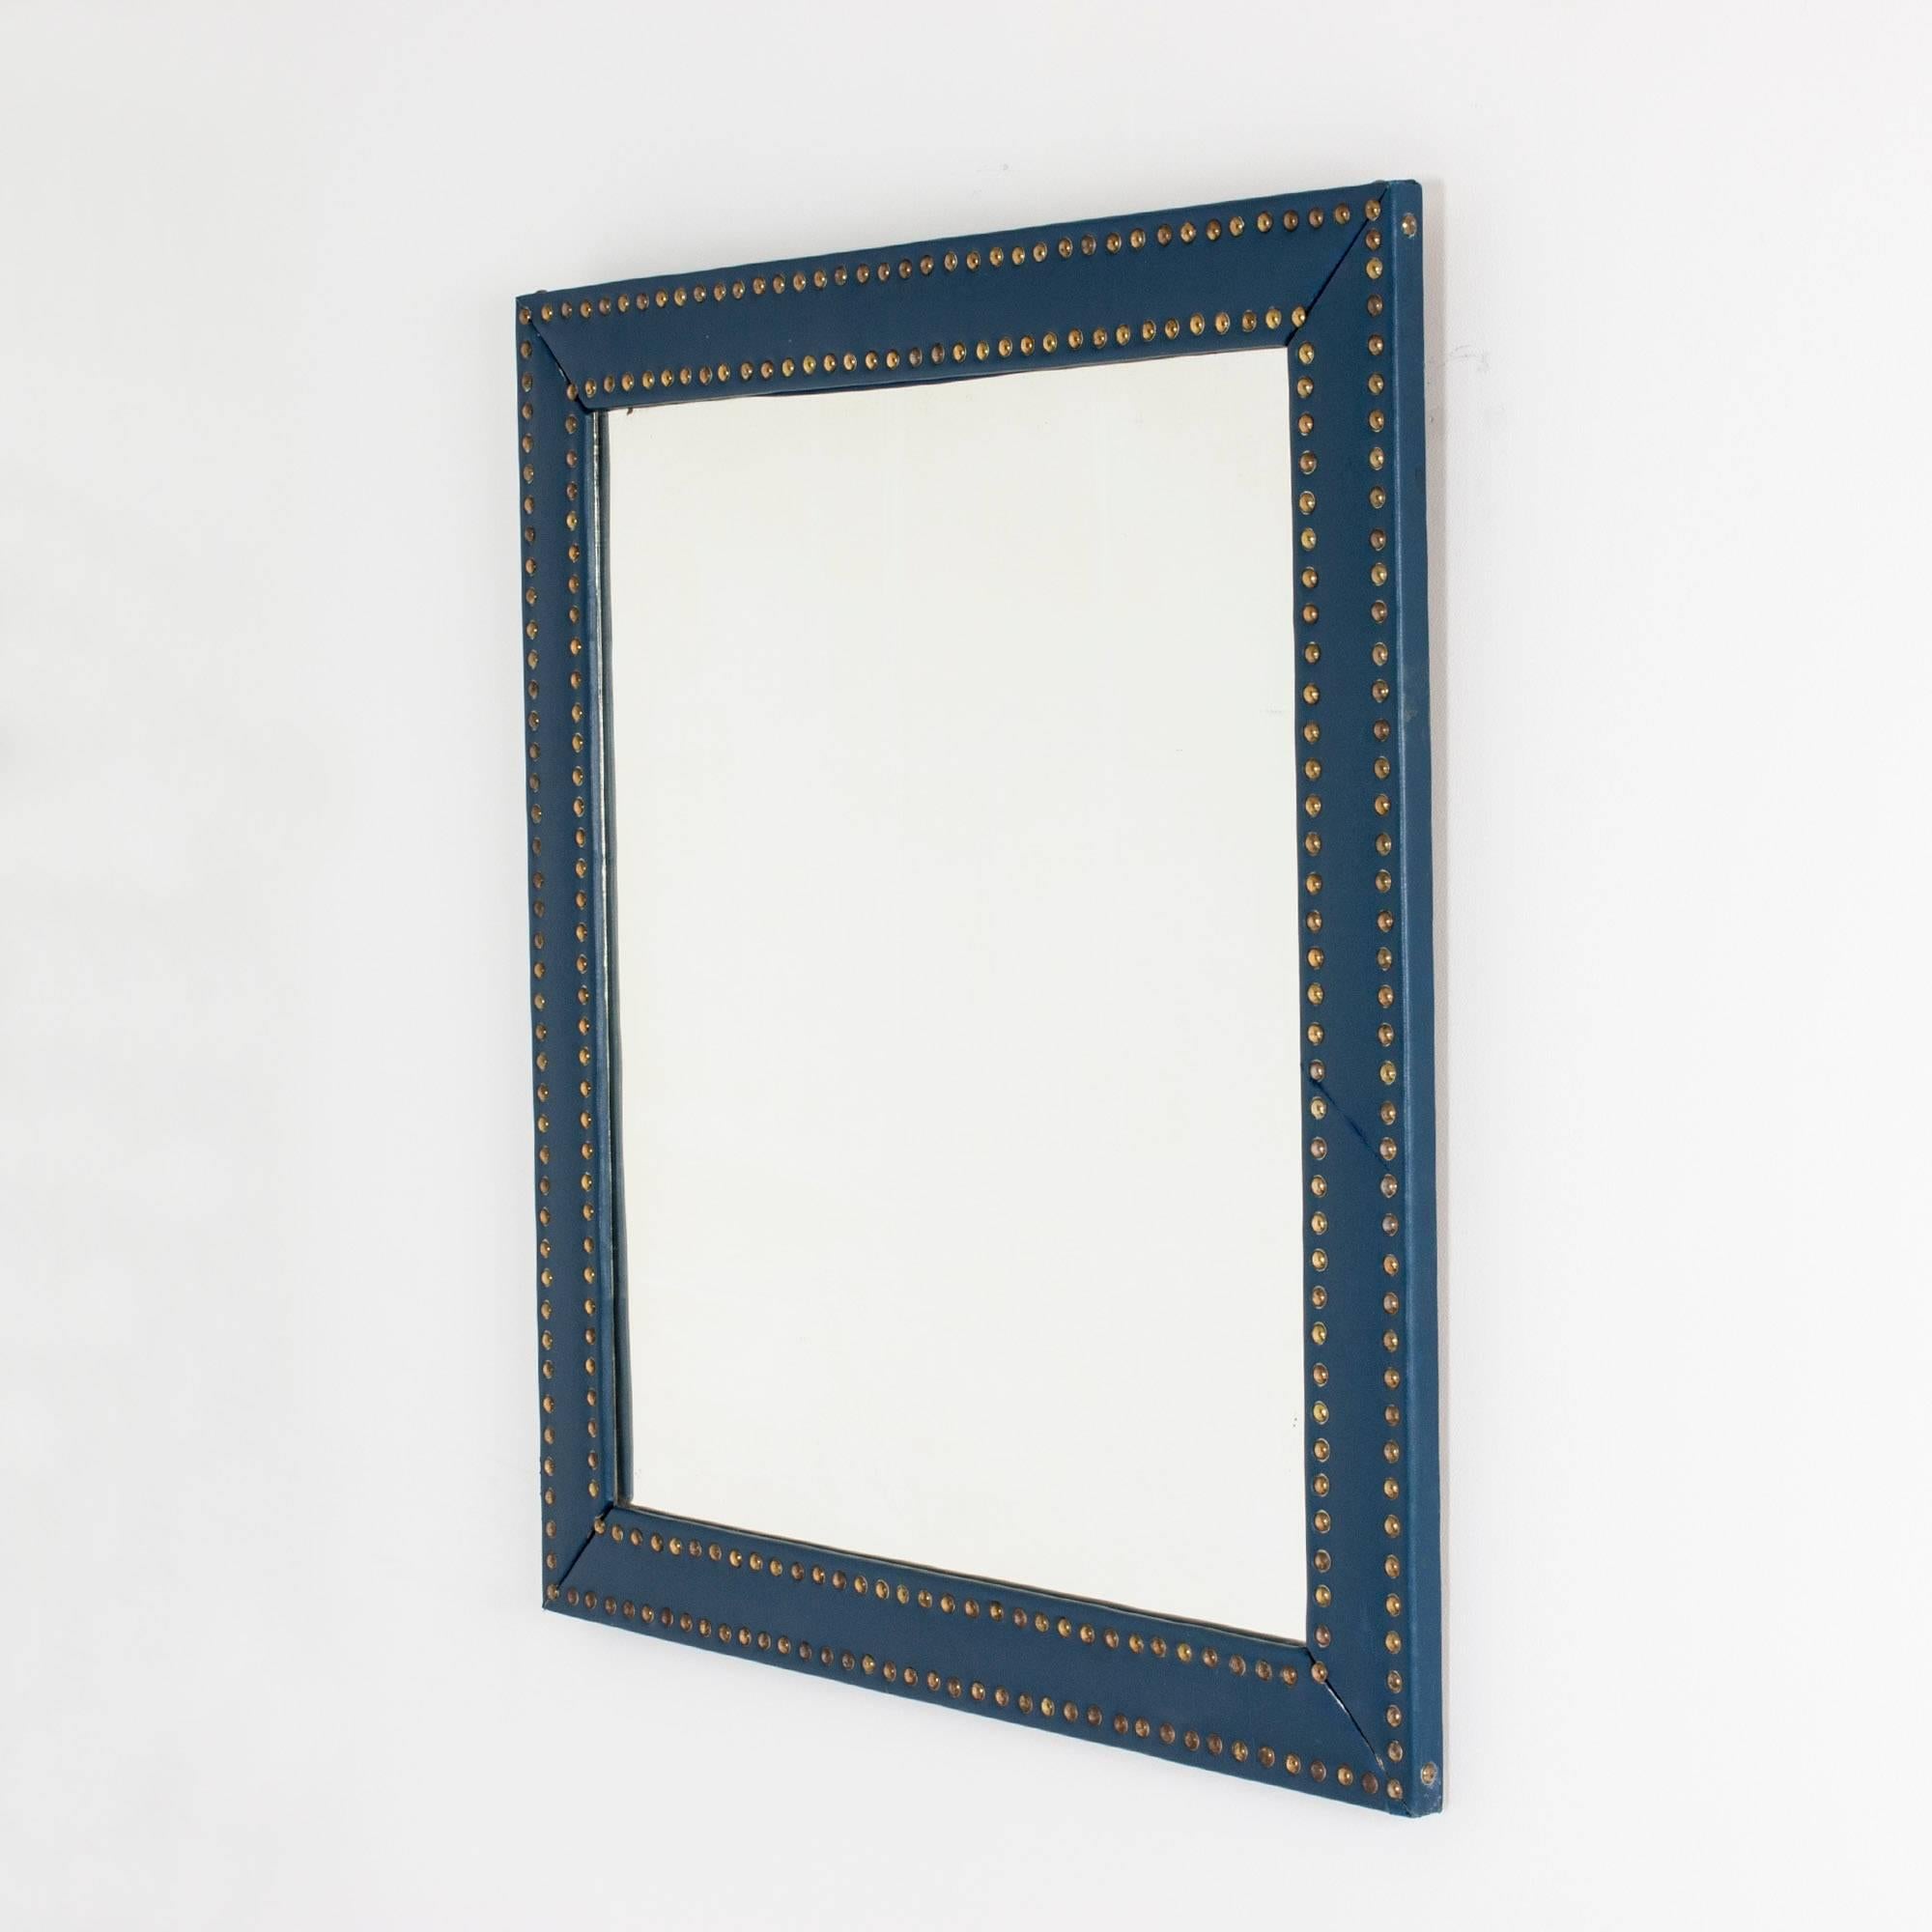 Large wall mirror by Otto Schulz. Frame dressed in dark blue faux leather, decorated with numerous brass nails. Nice combination of elegance and playfulness.